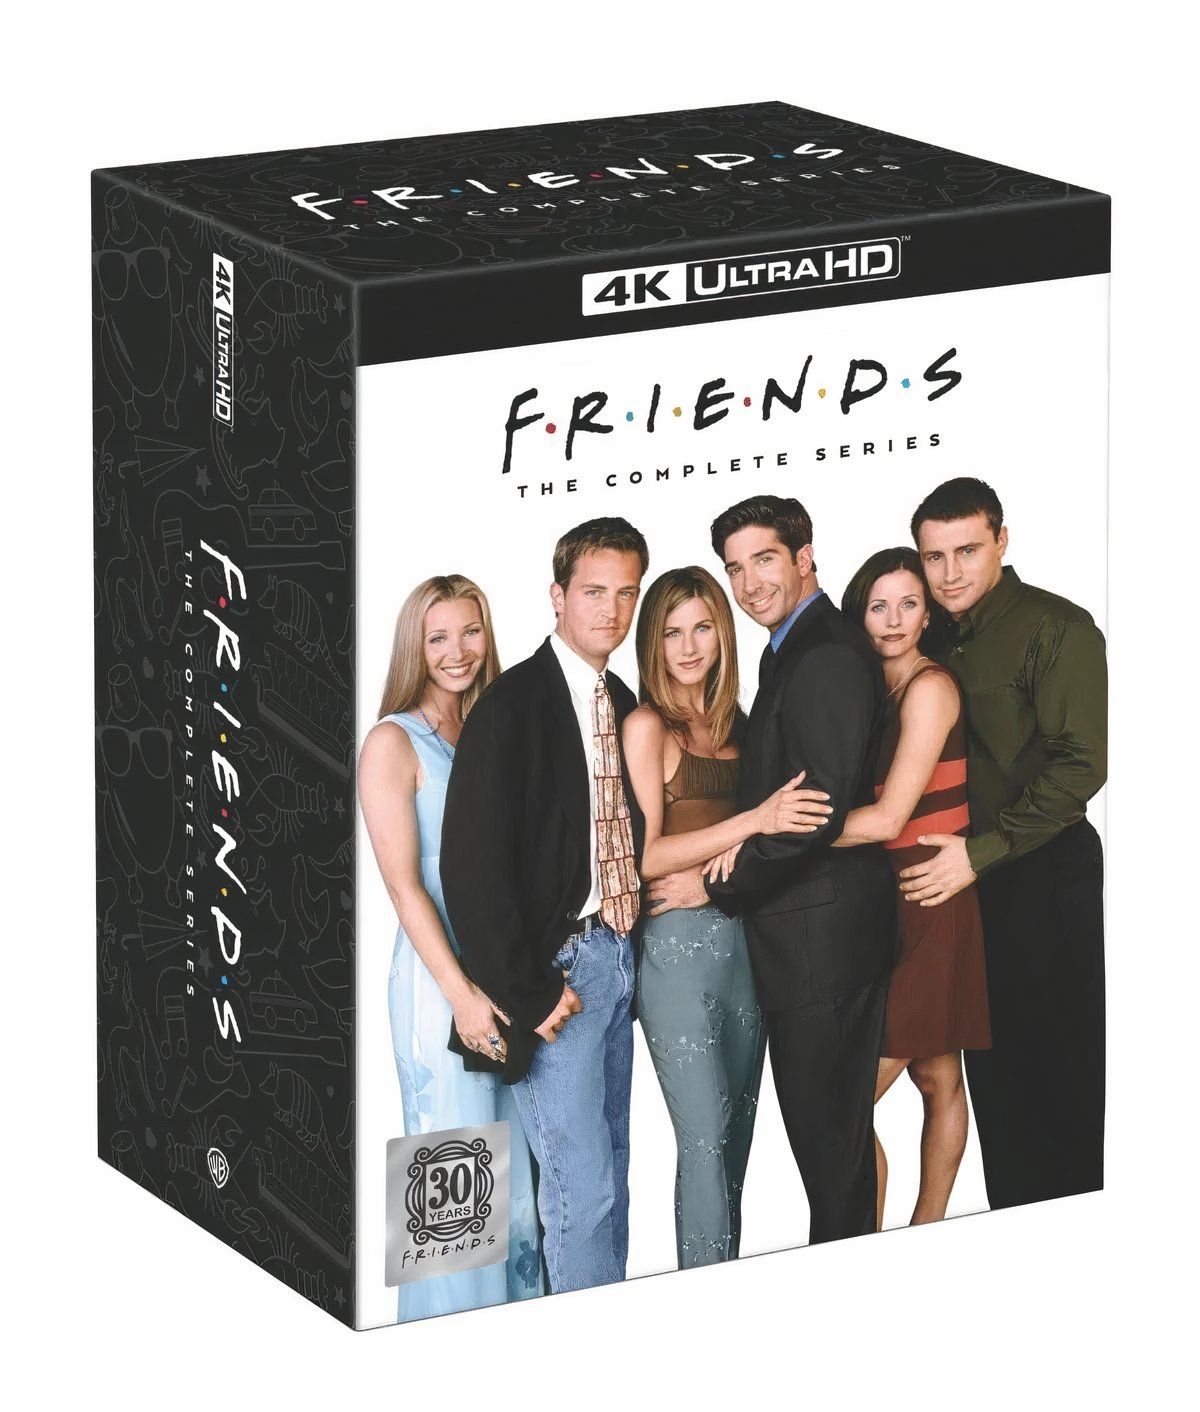 The Friends 4K UHD box set released by Warner Bros. Discovery Home Entertainment